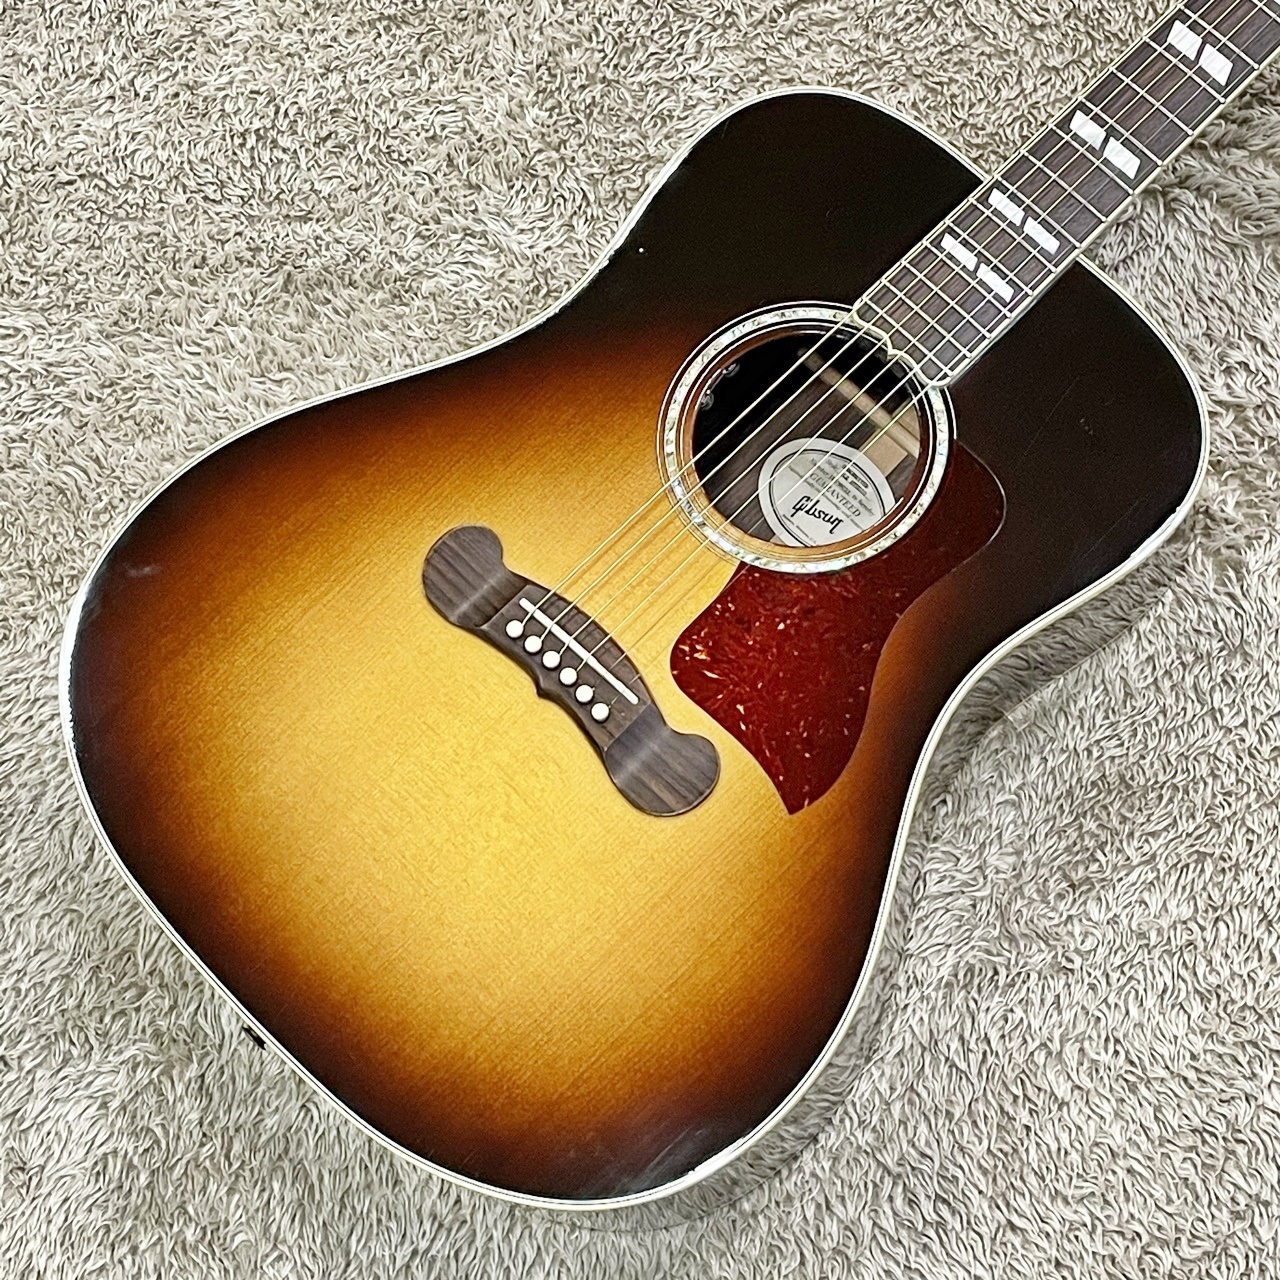 Gibson Songwriter Deluxe L.r.baggs搭載 総単板-silversky-lifesciences.com